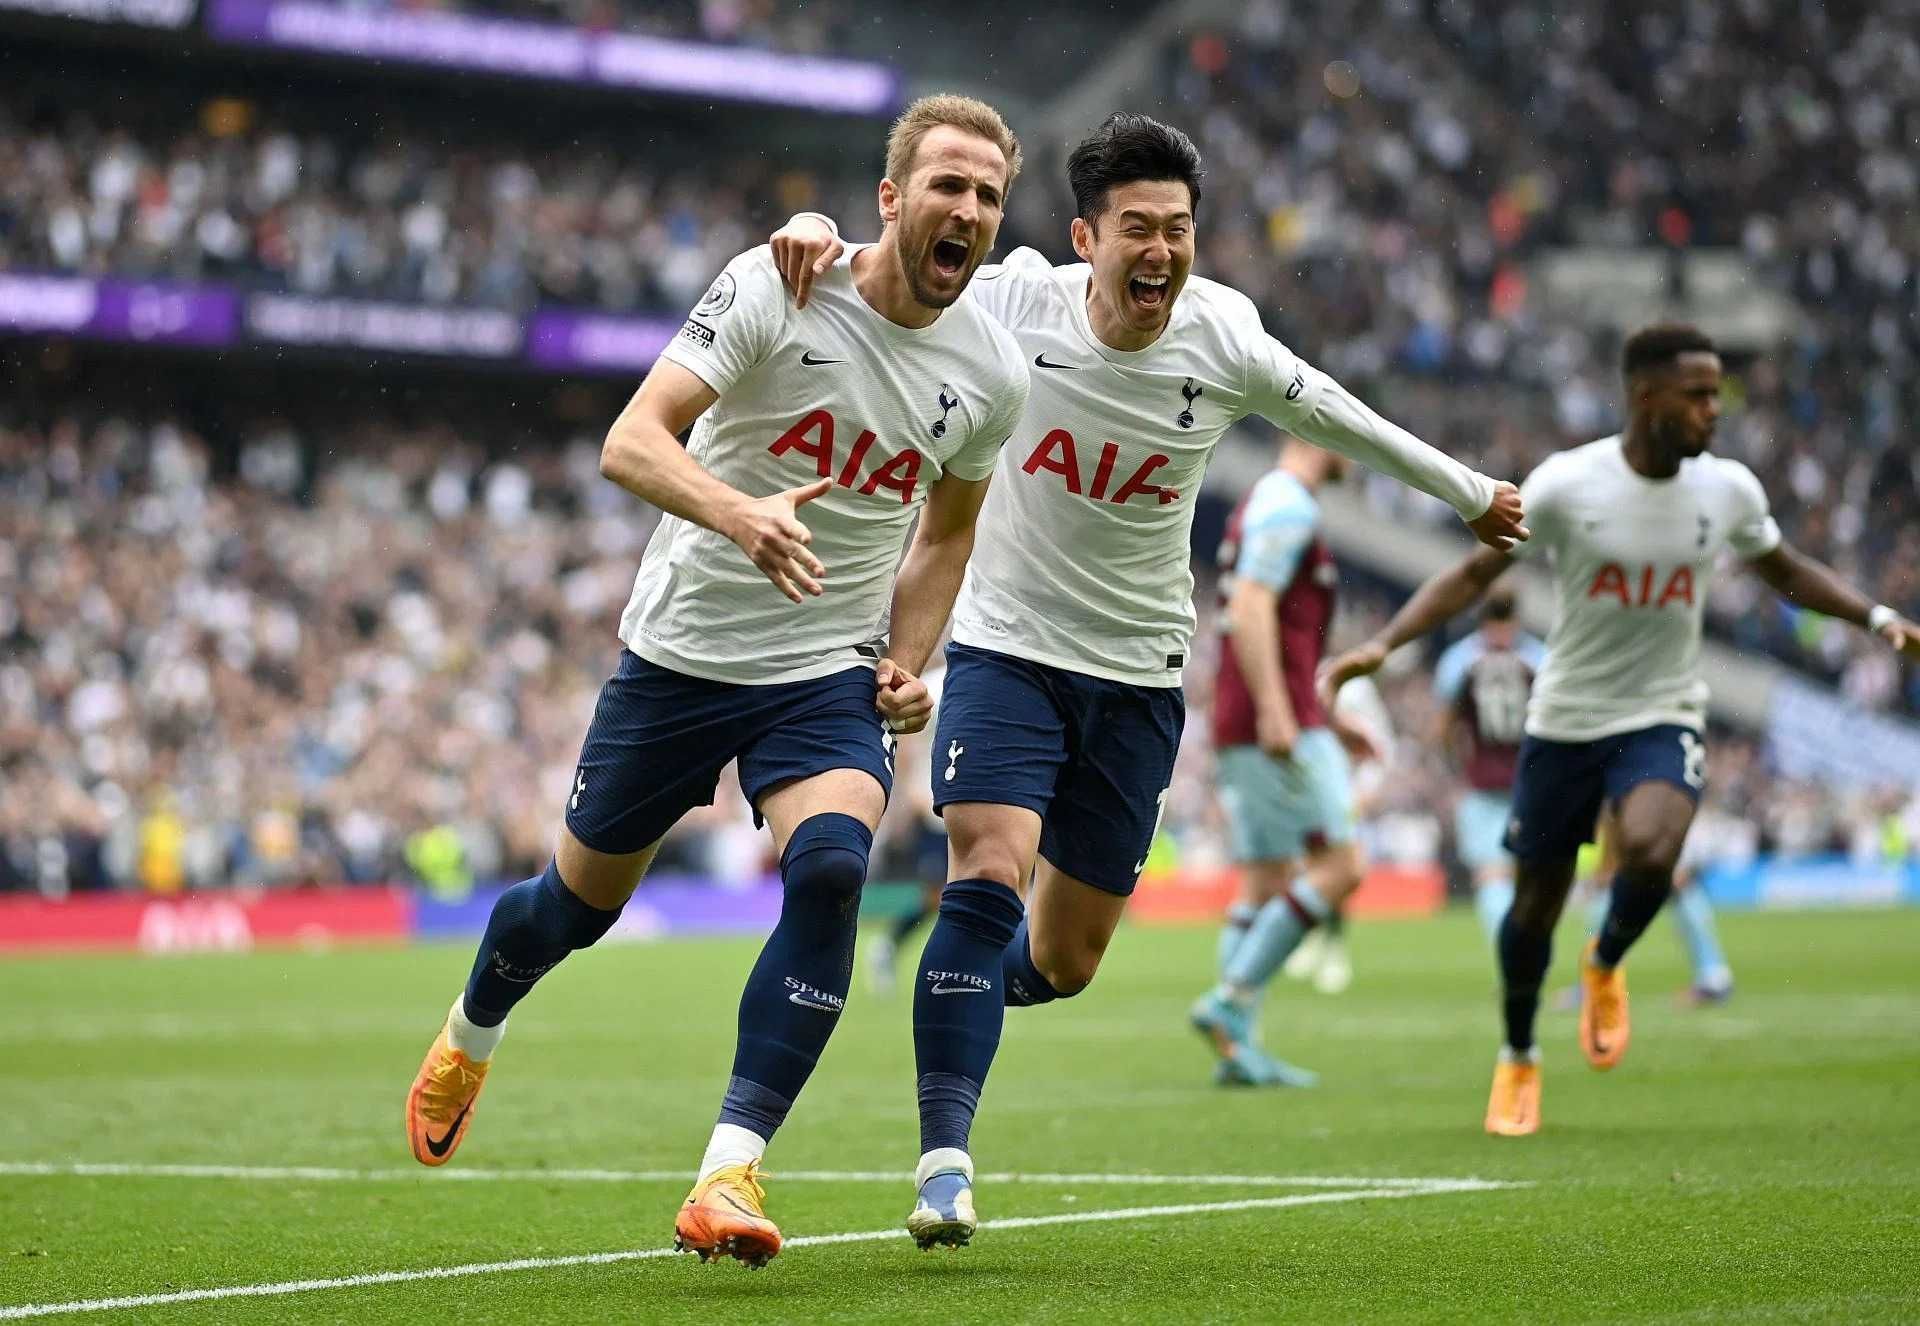 Harry Kane and Son Heung-Min have been key players for Tottenham